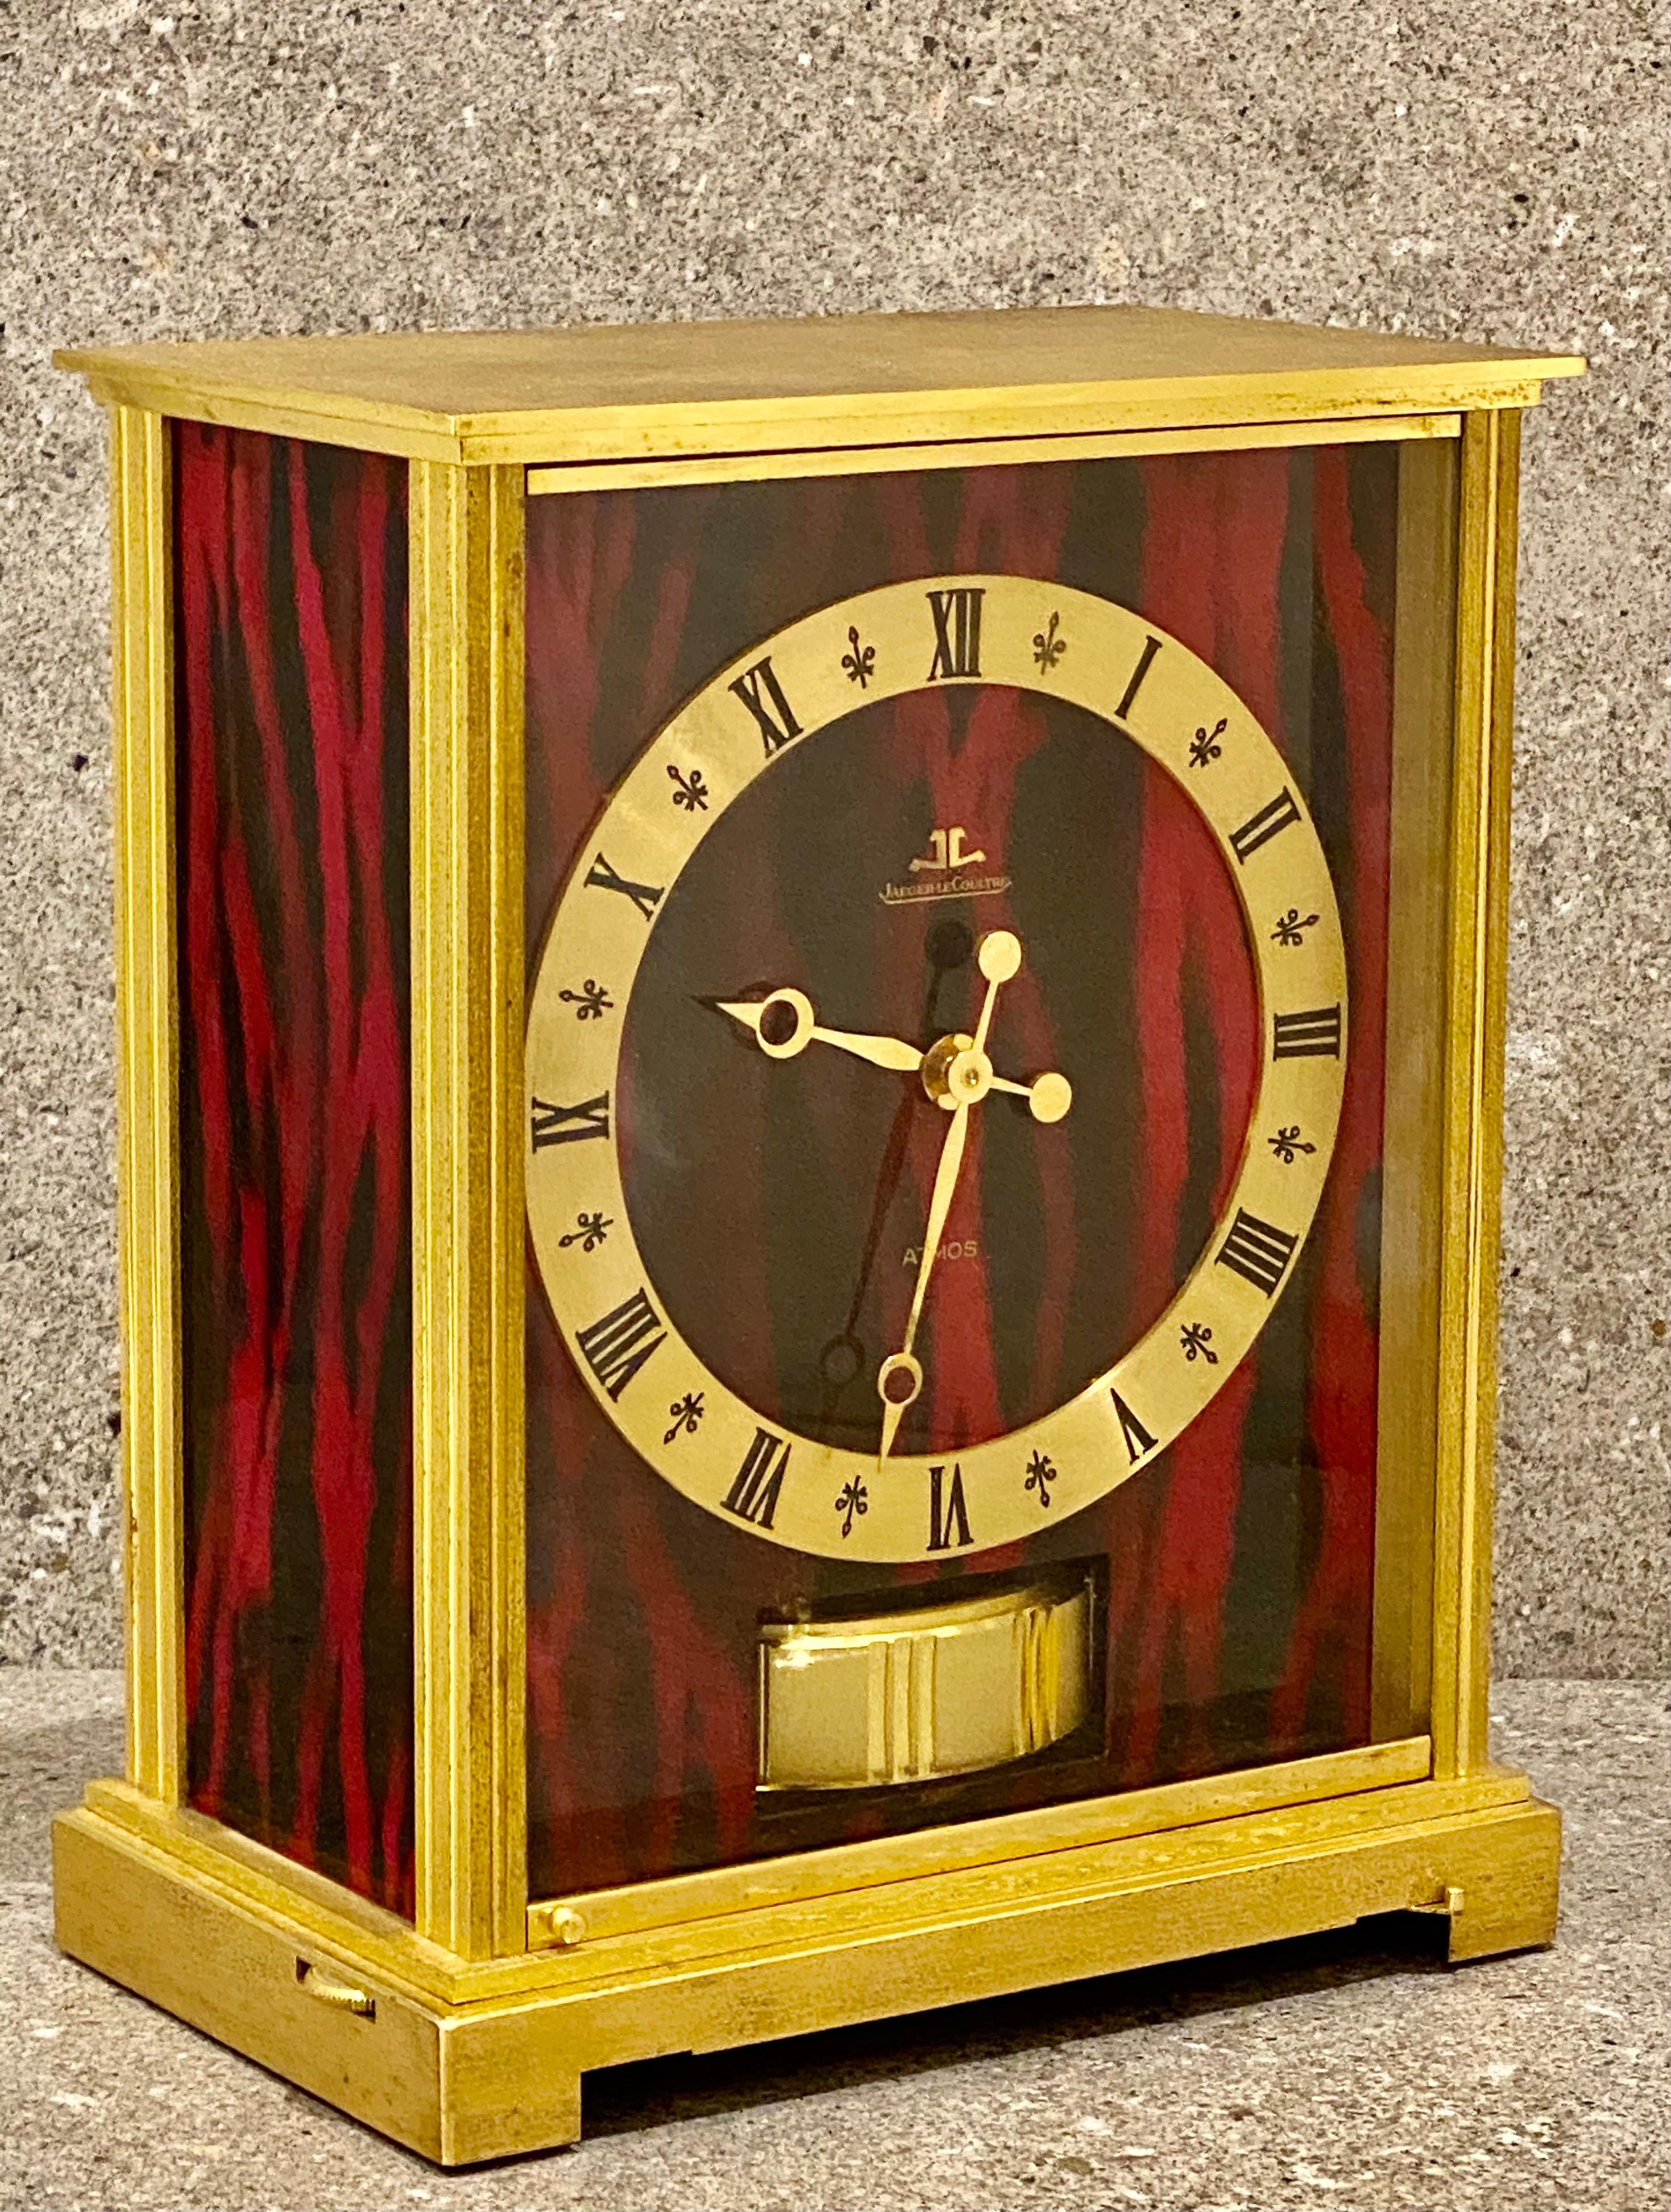 A nice example of A Jaeger-LeCoultre Atmos clock, Embassy, signed Jaeger Le Coultre, with red and black faux marble panels, base with stop lever, dial with Roman chapter ring and visible balance wheel below, 22cm high, with Jaeger Le Coultre booklet